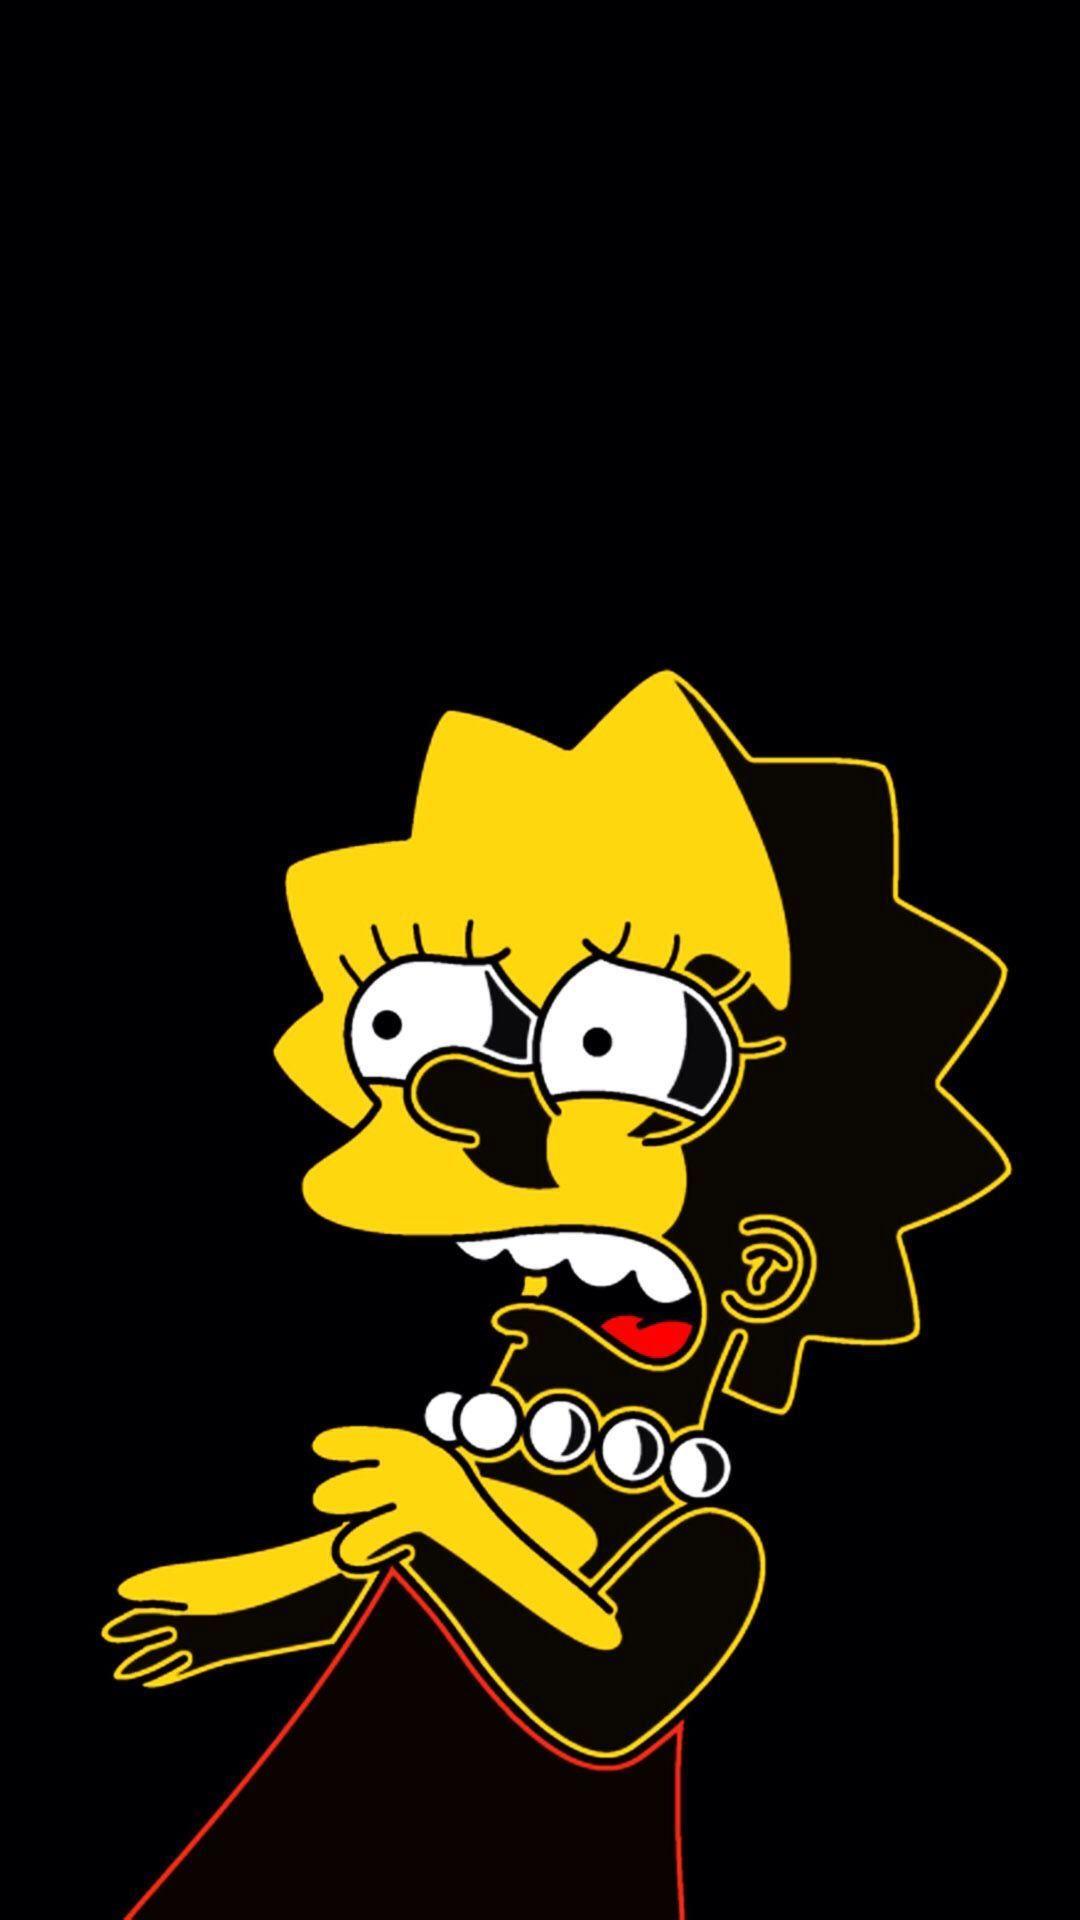 Simpsons Phone Wallpapers - Top Free Simpsons Phone Backgrounds